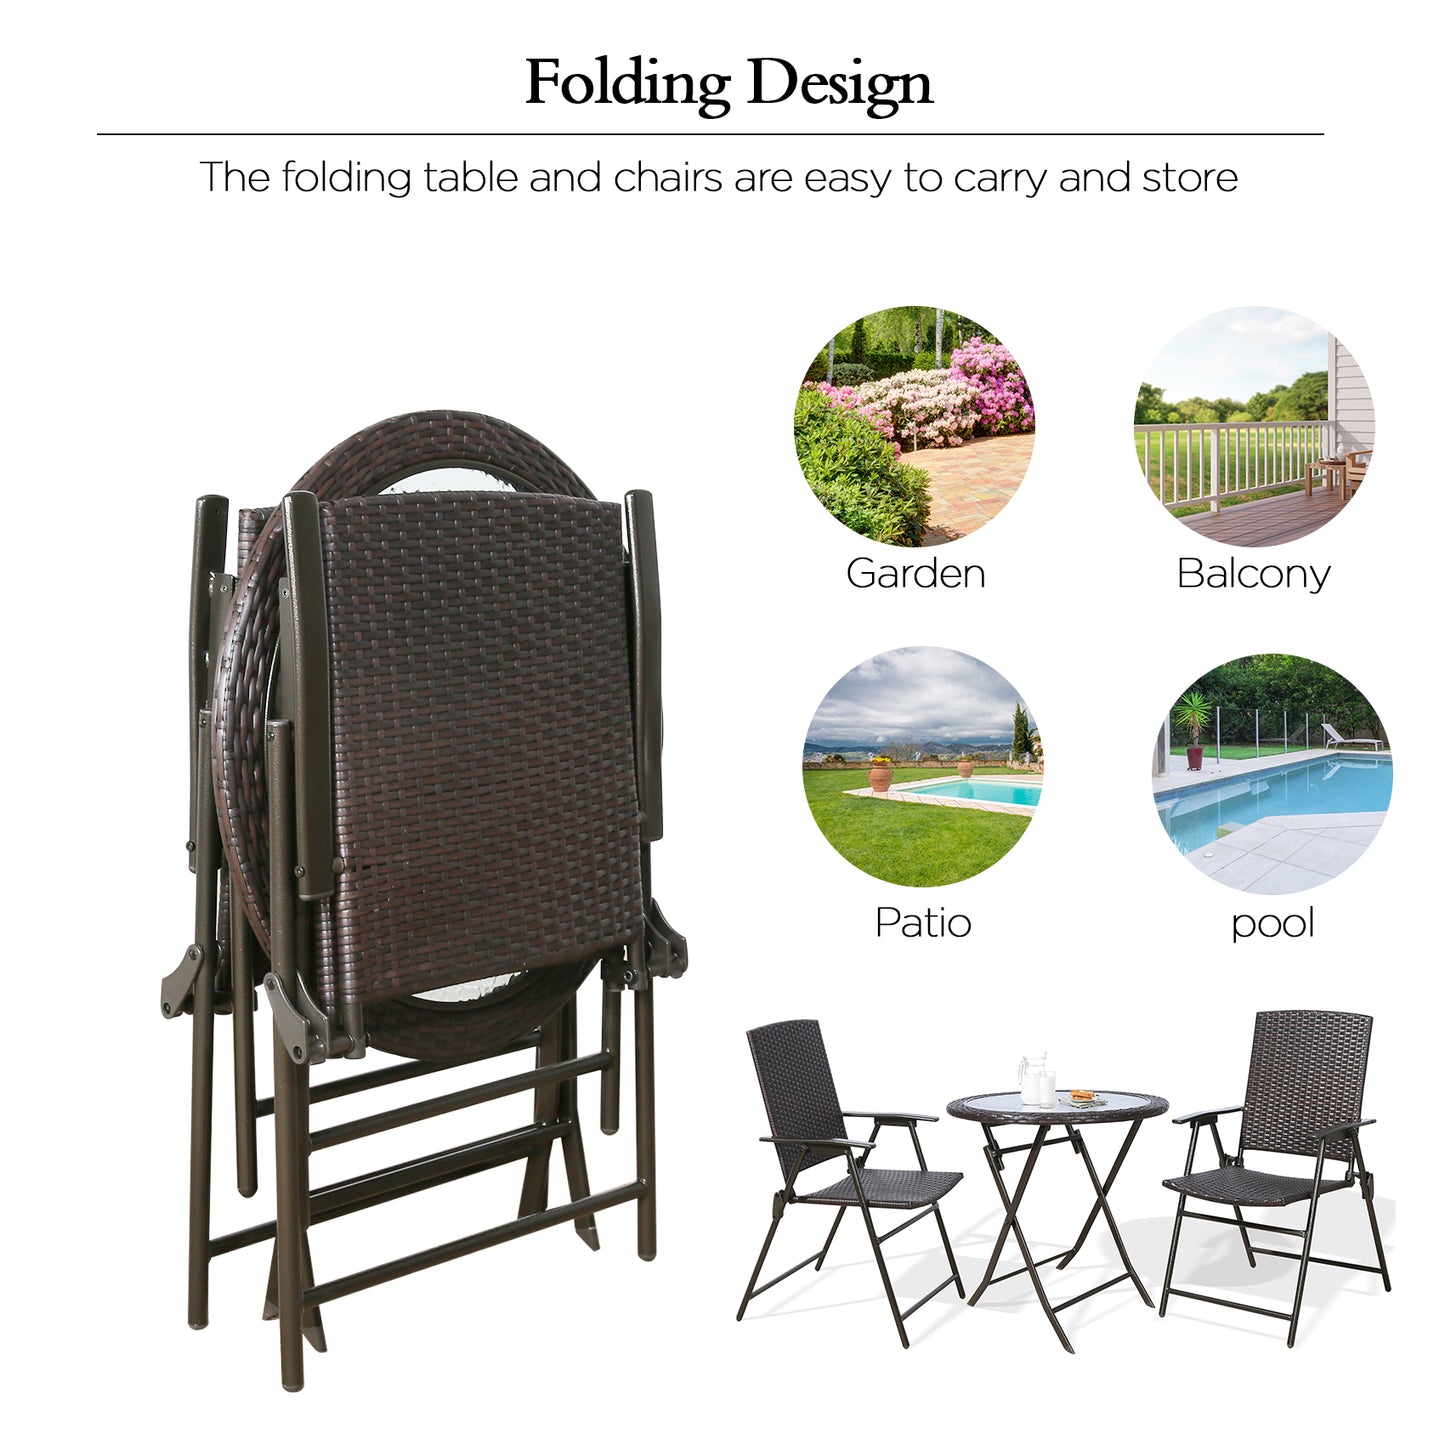 3 Pieces Wicker Folding Bistro Set, Balcony Table and Chairs Sets, Garden Backyard Furniture